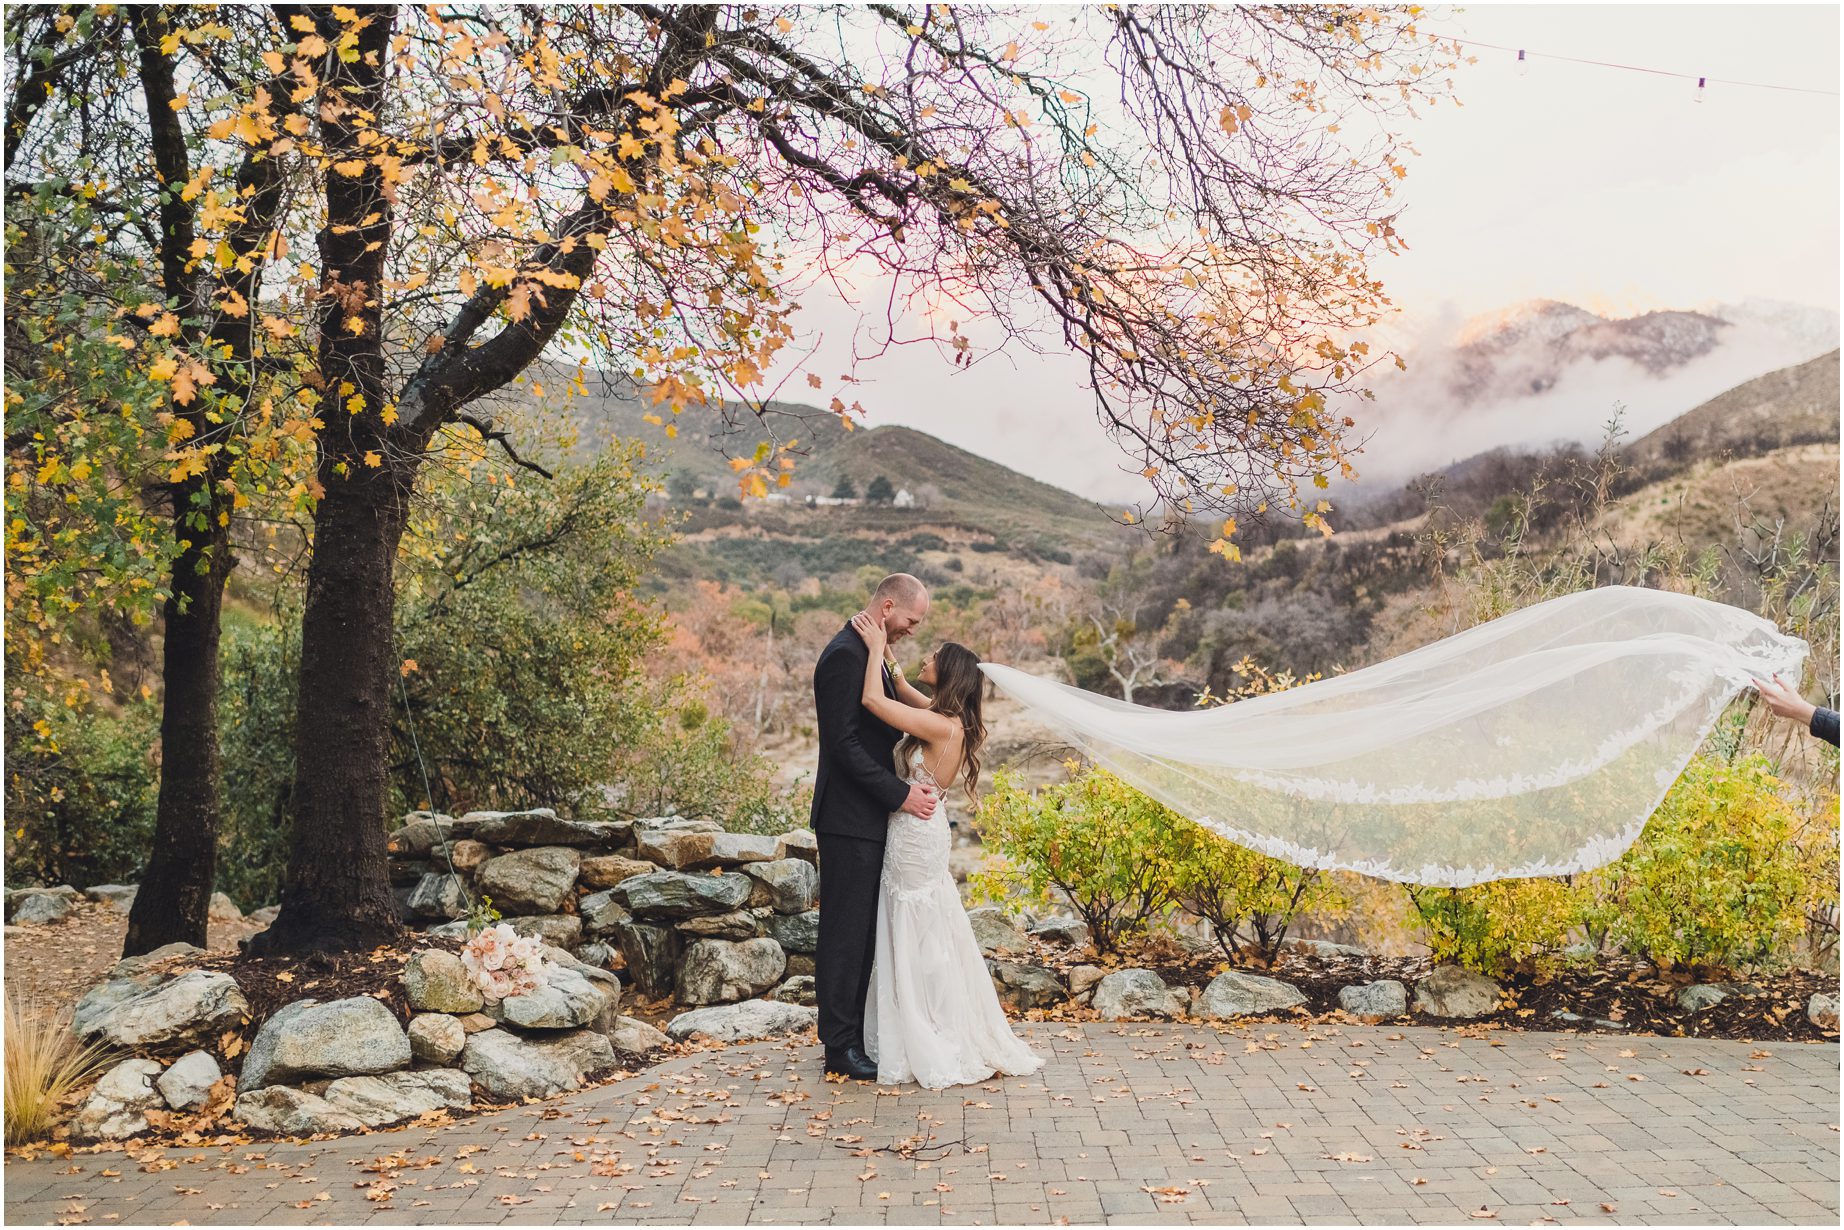 A couples portrait by Sun & Sparrow featuring Serendipity Garden Weddings. The bride's veil soars in the wind